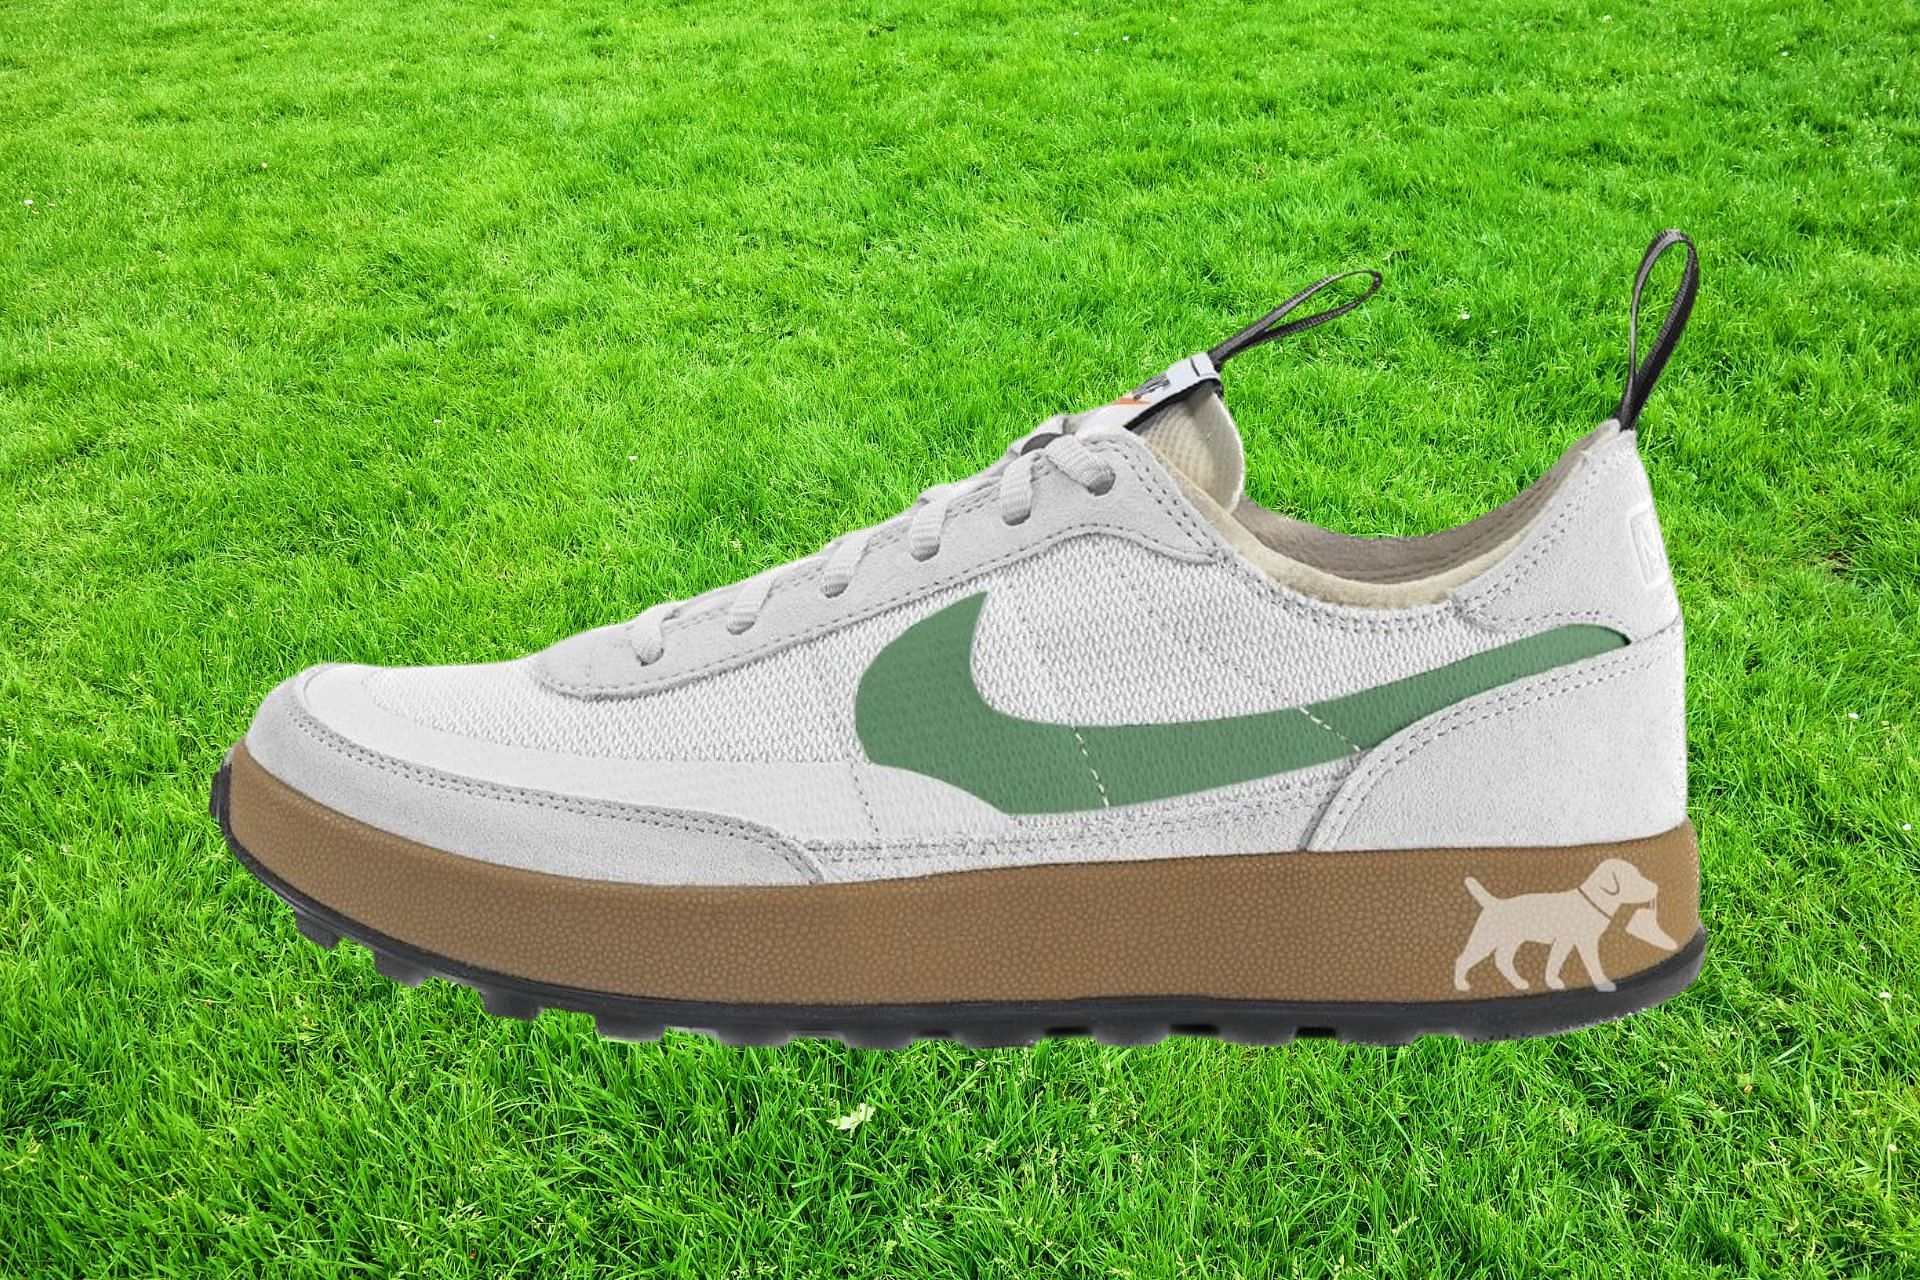 Tom Sachs: Tom Sachs x NikeCraft General Purpose Shoe White Gorge Green  shoes: Where to buy, price, and more details explored